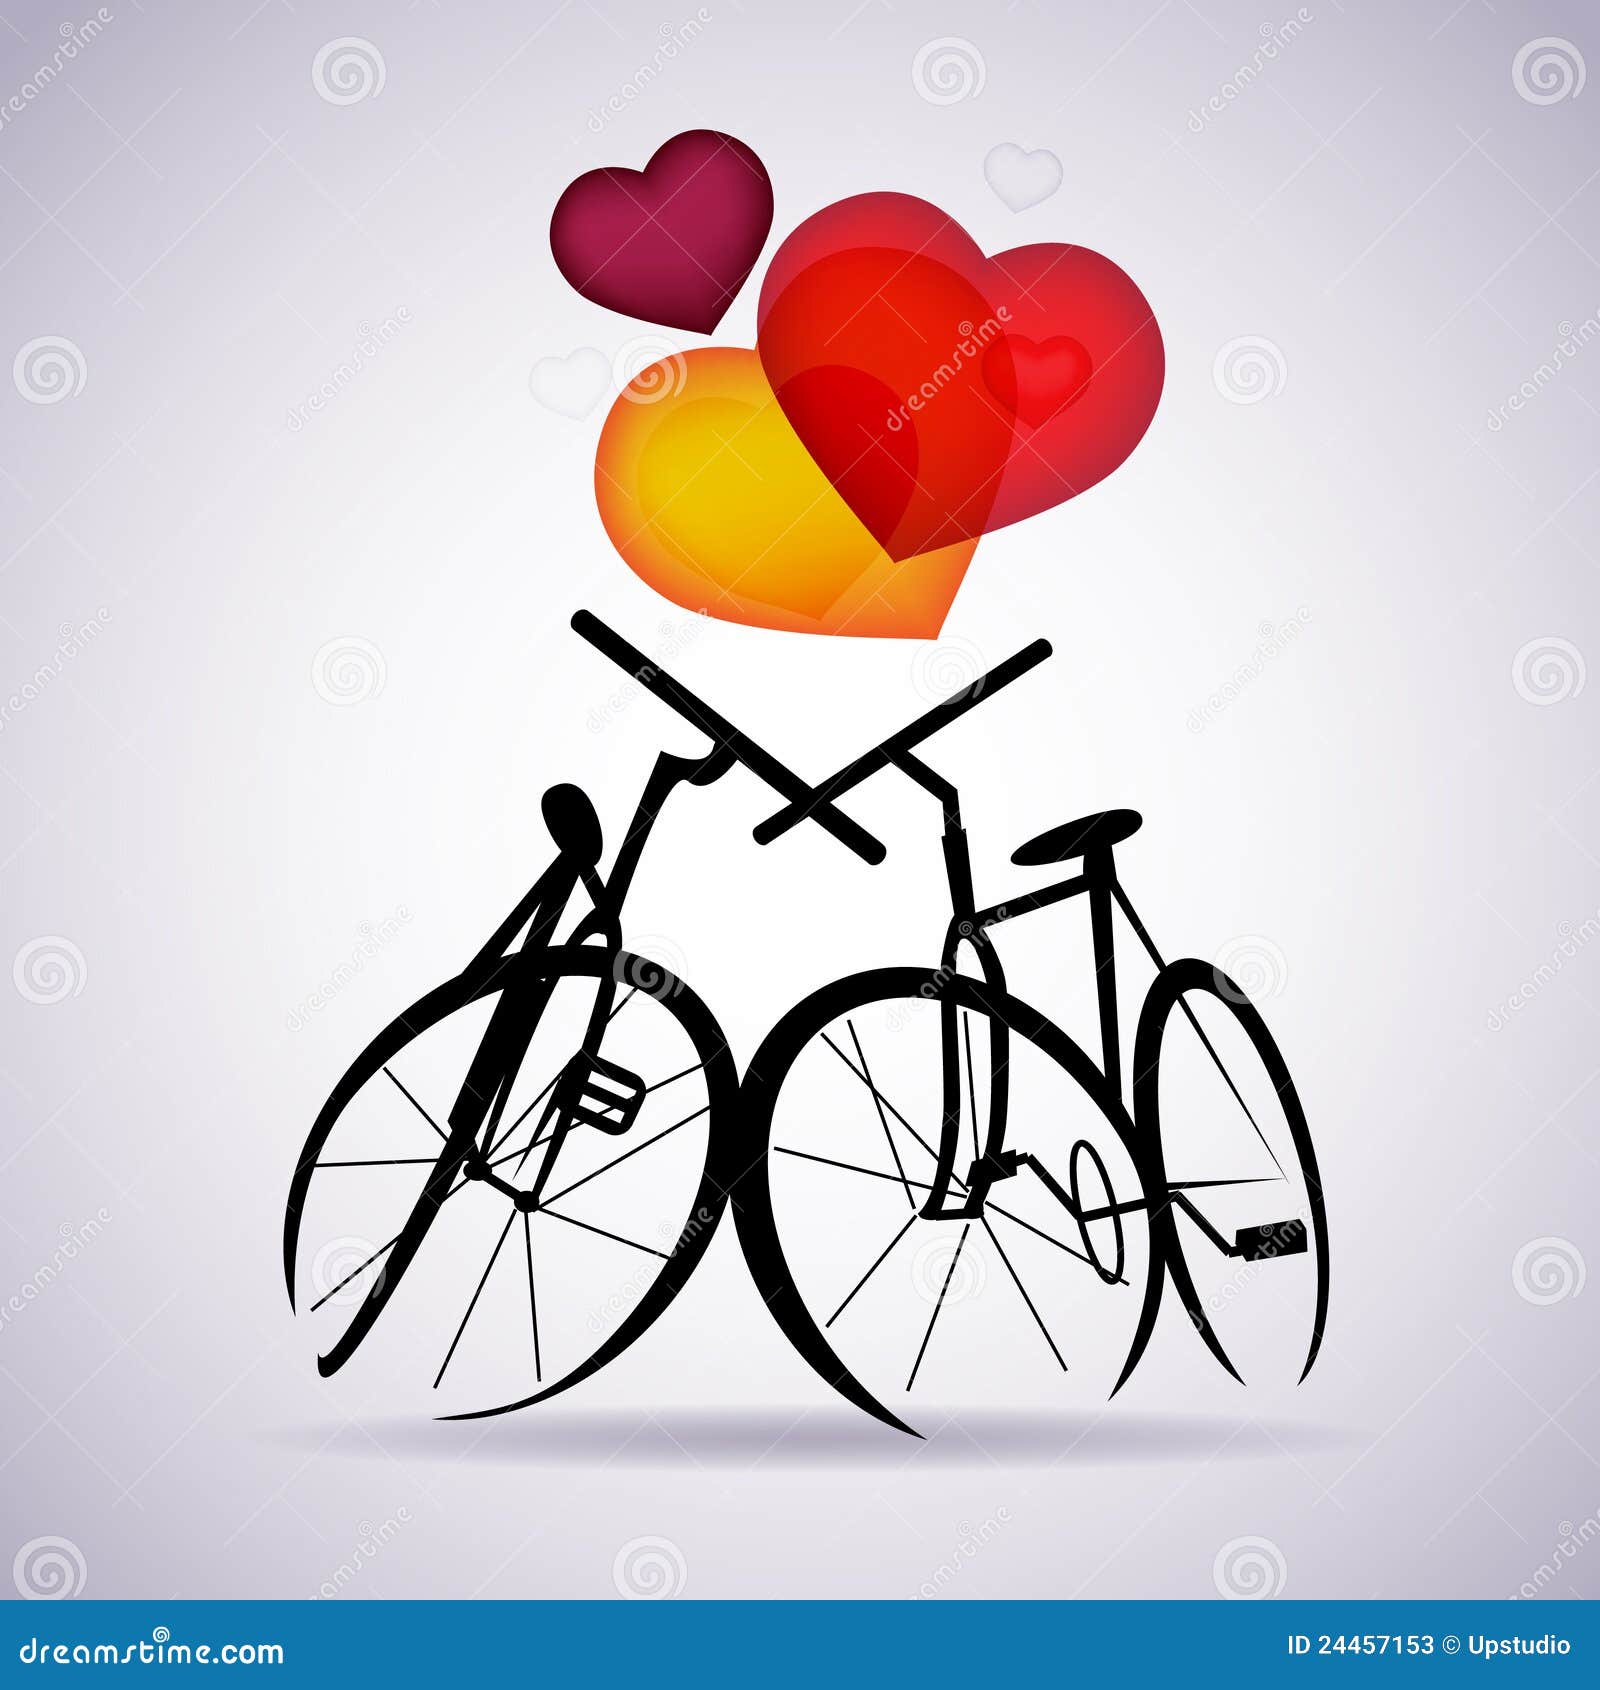 Vector Card With Two Bicycles Stock Vector - Image: 244571531300 x 1390